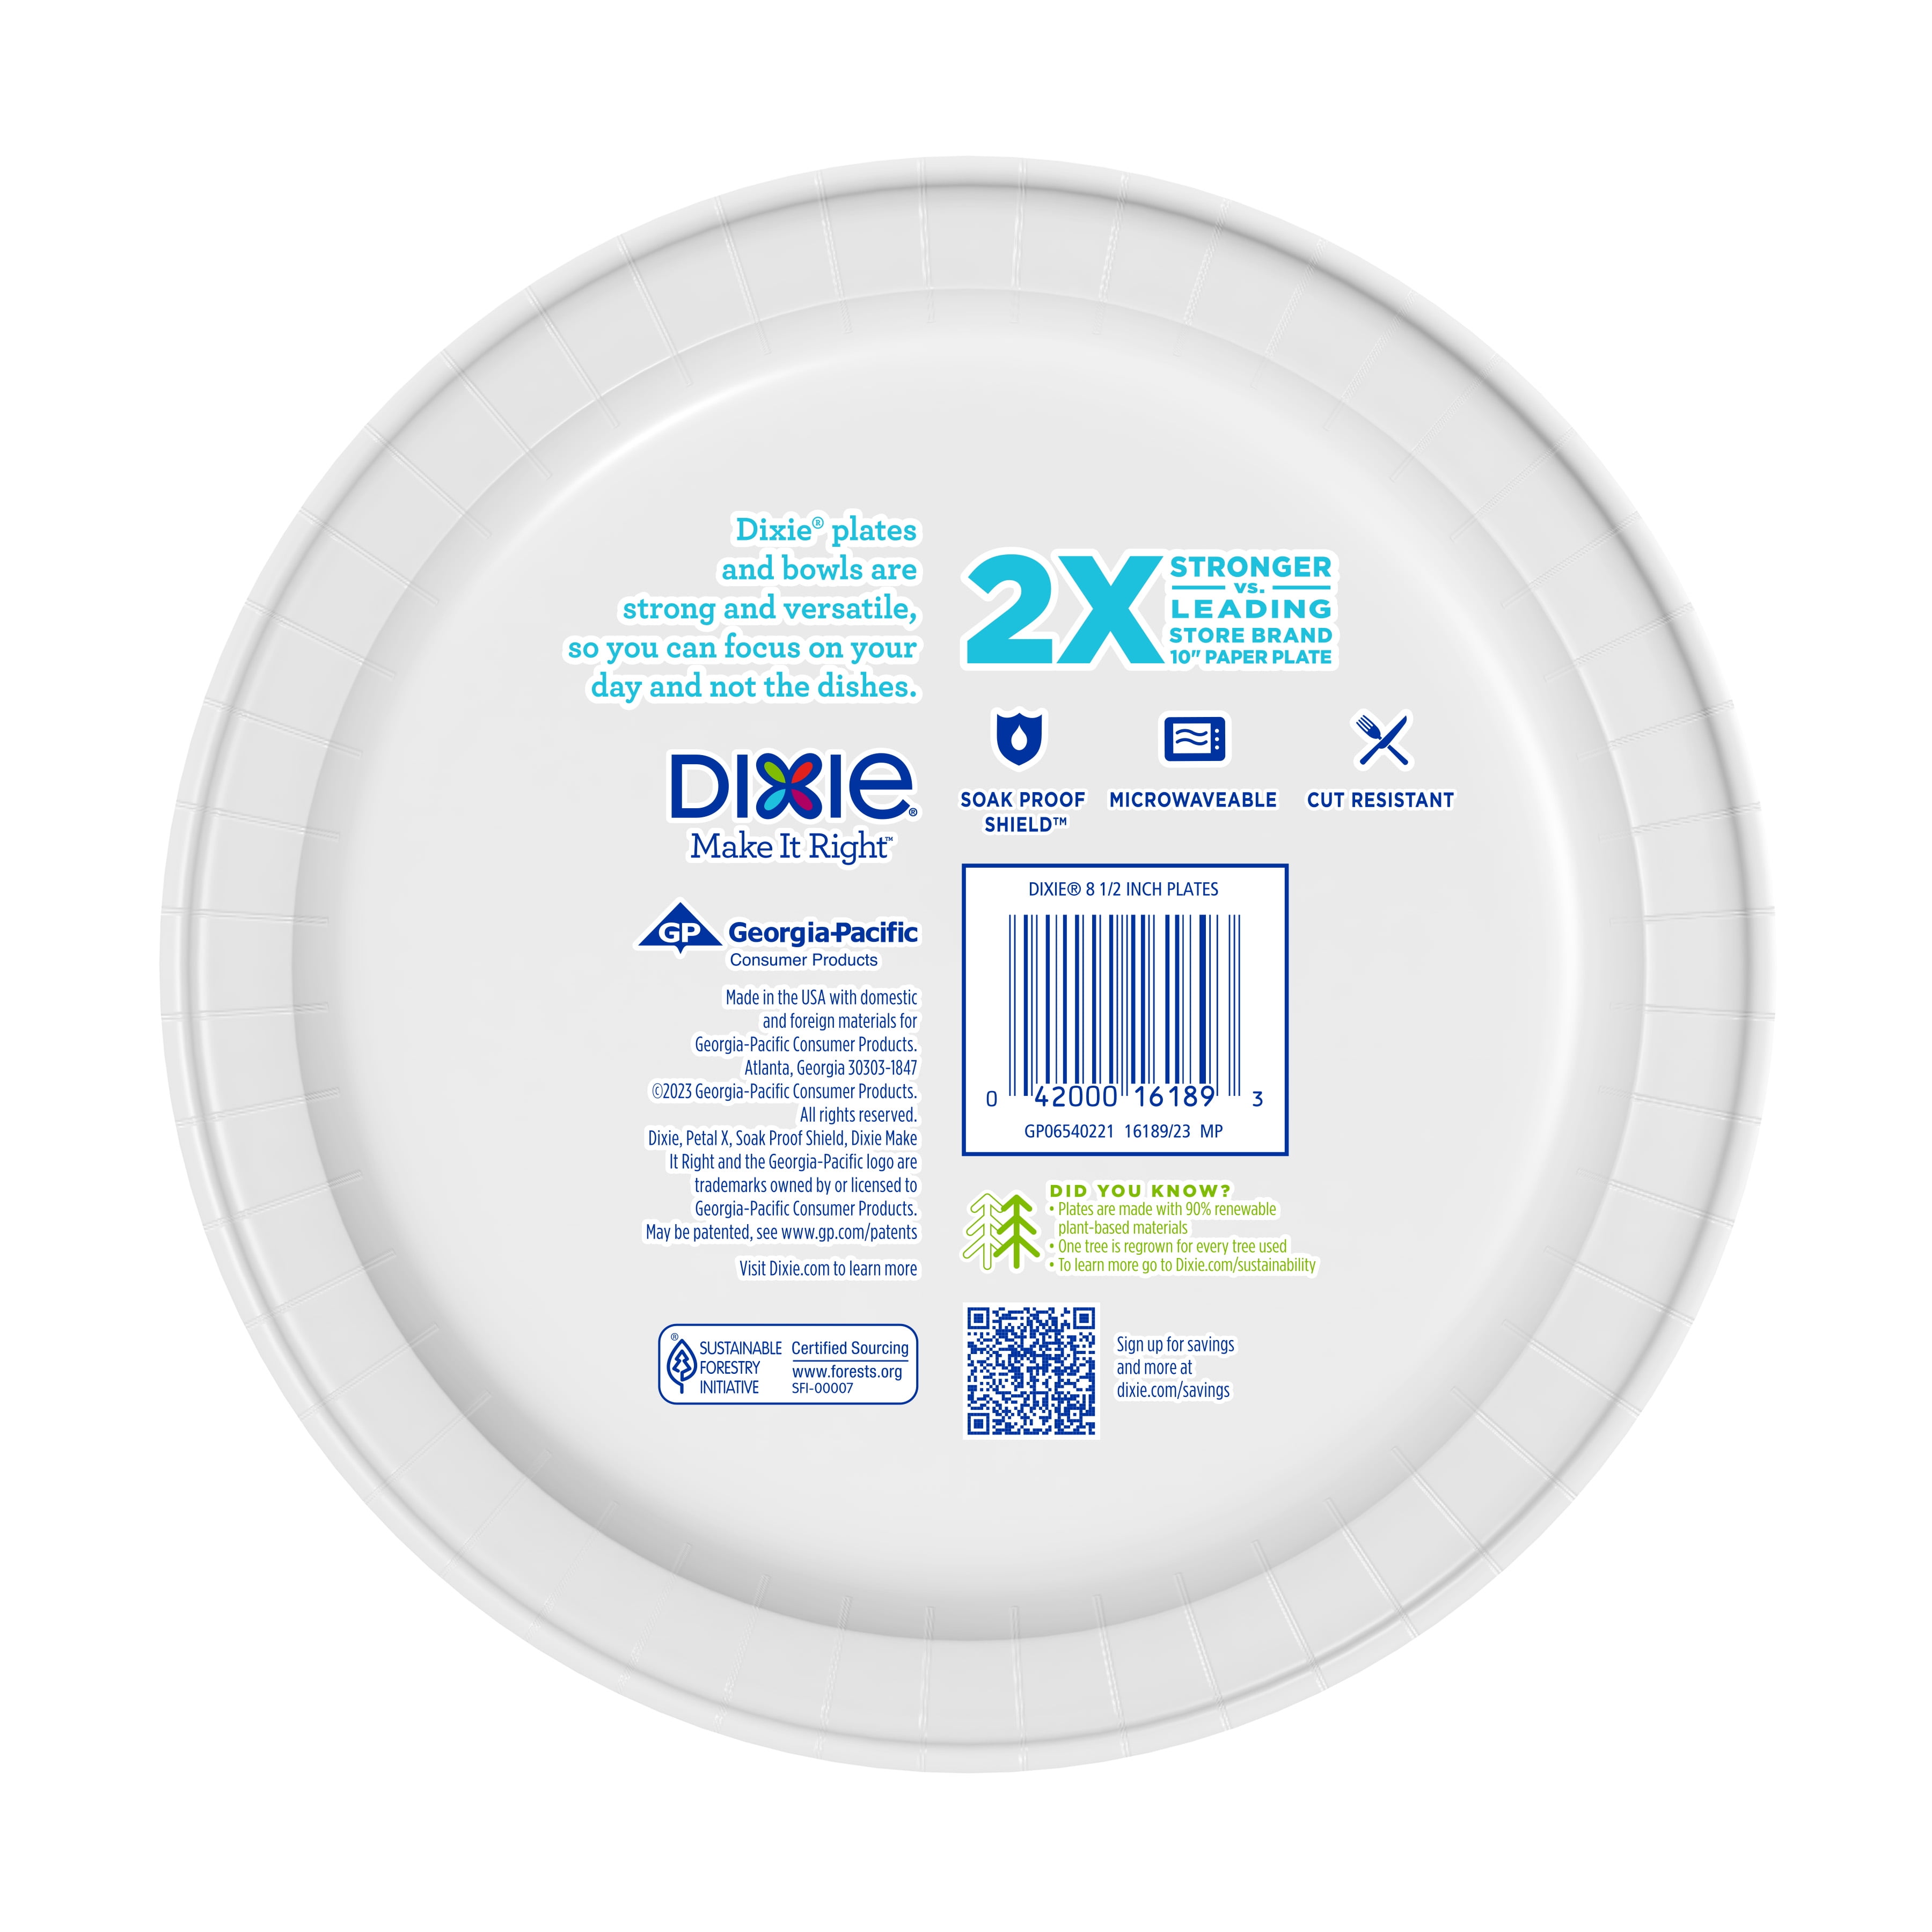 Dixie Everyday Paper Plates Printed 6 7/8 Inch - 50 Count - Randalls